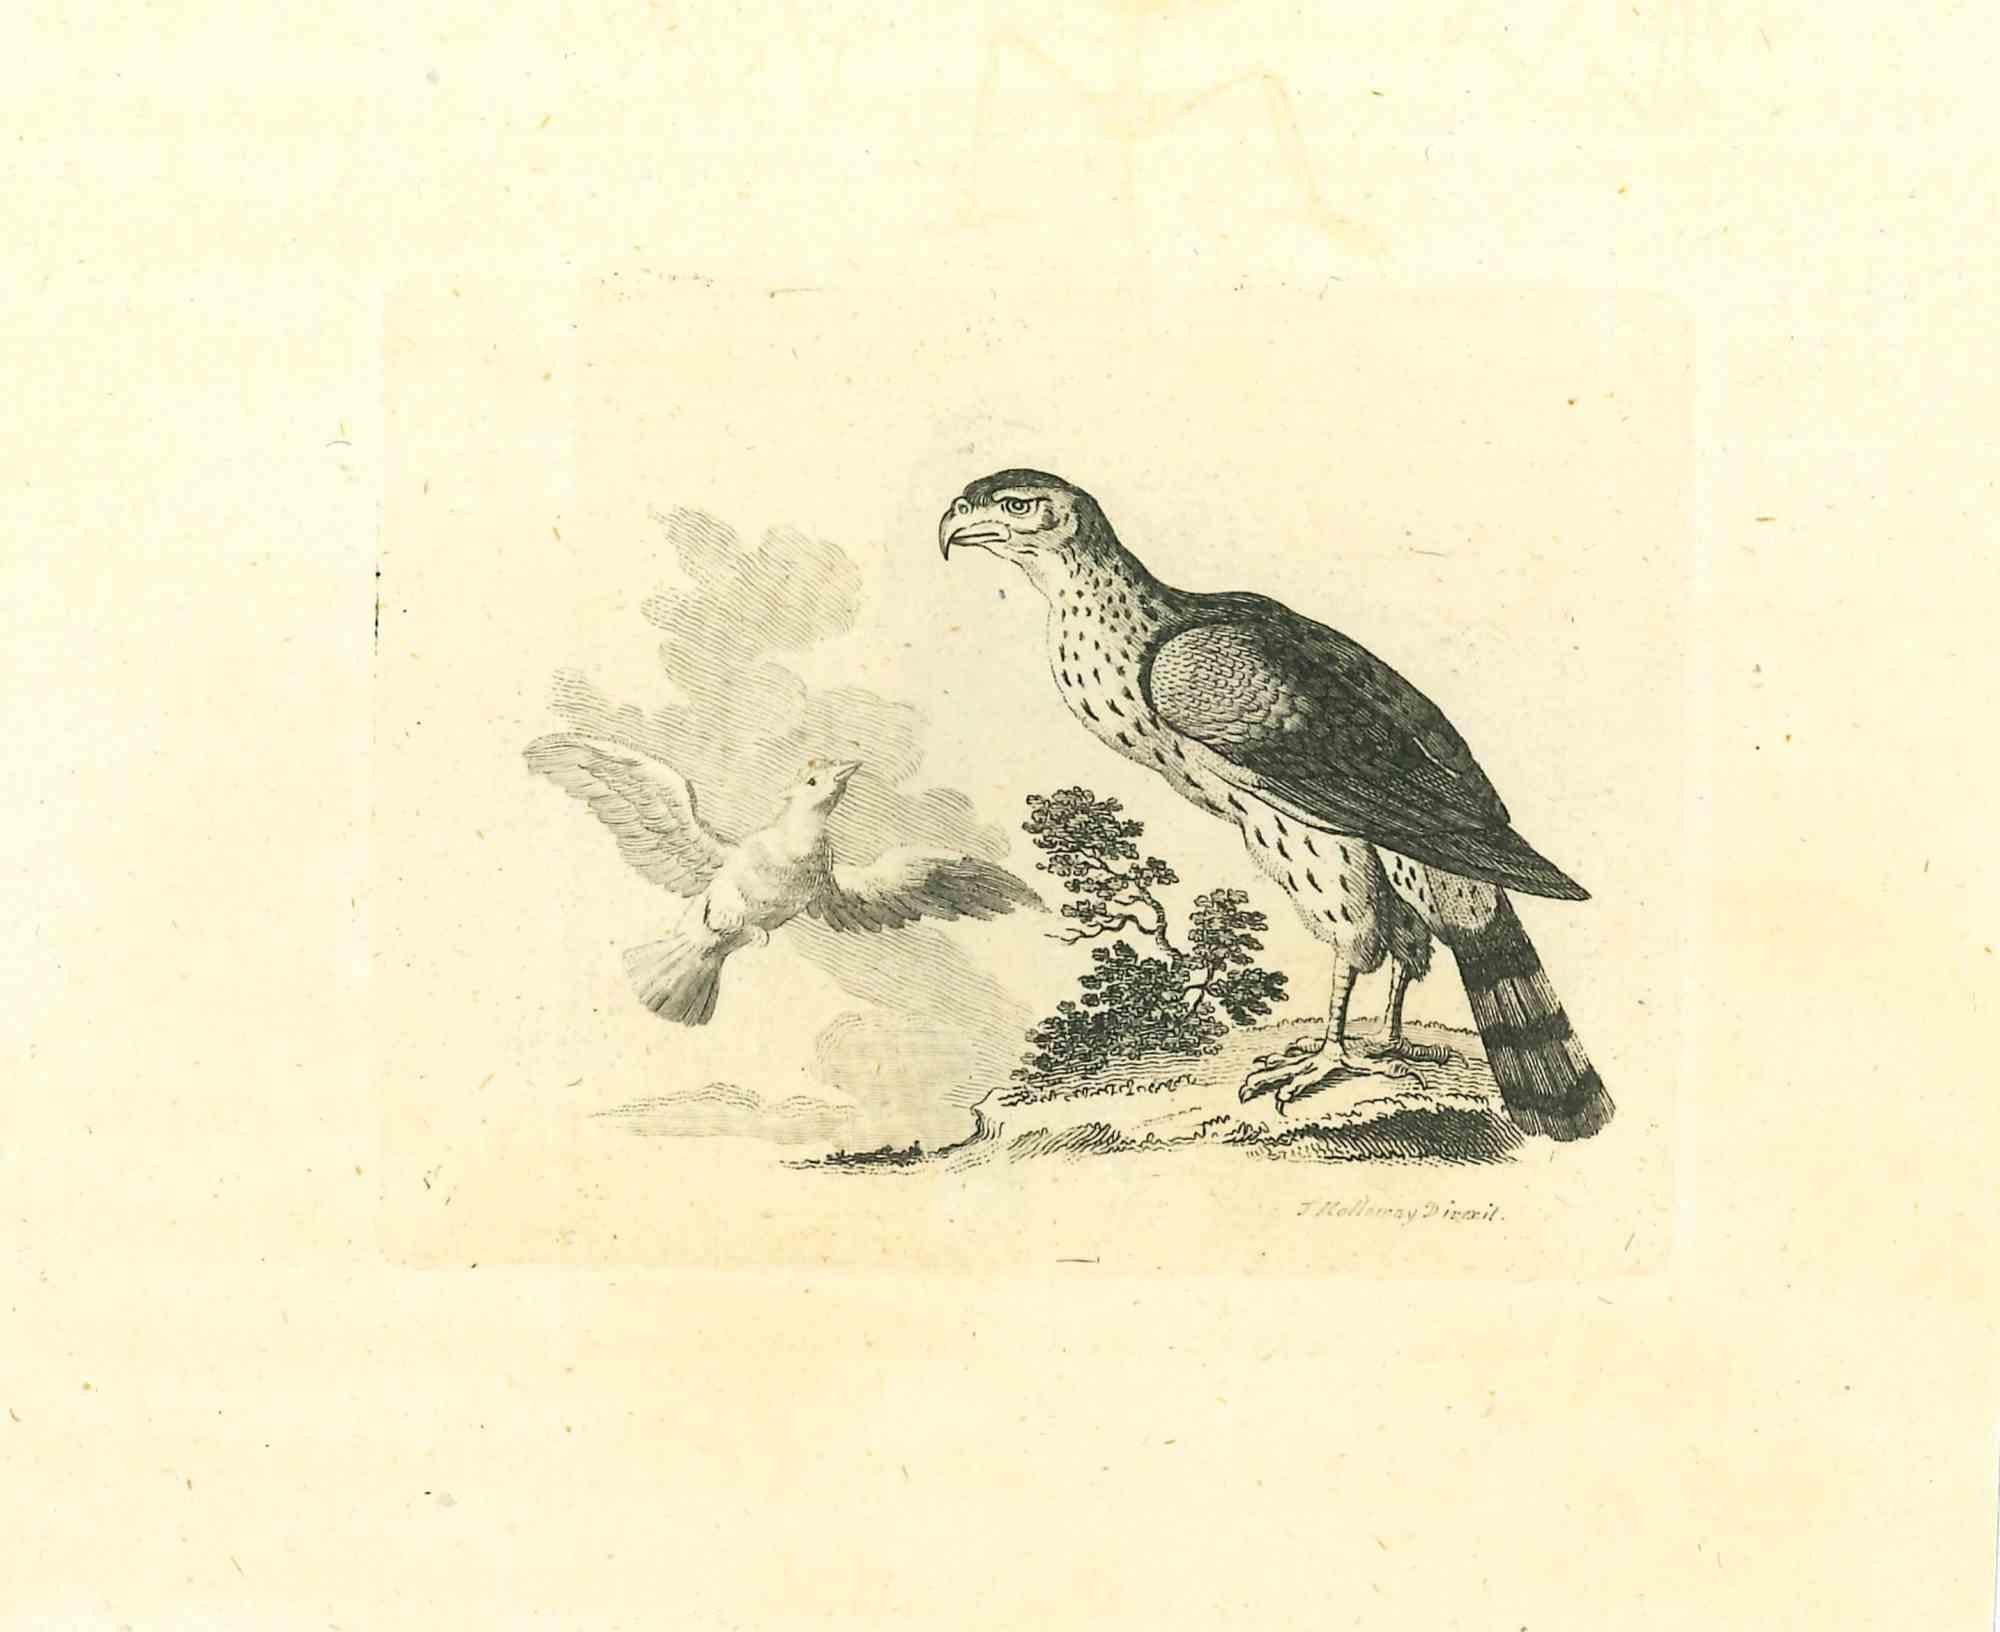 The Birds - Original Etching by Thomas Holloway - 1810